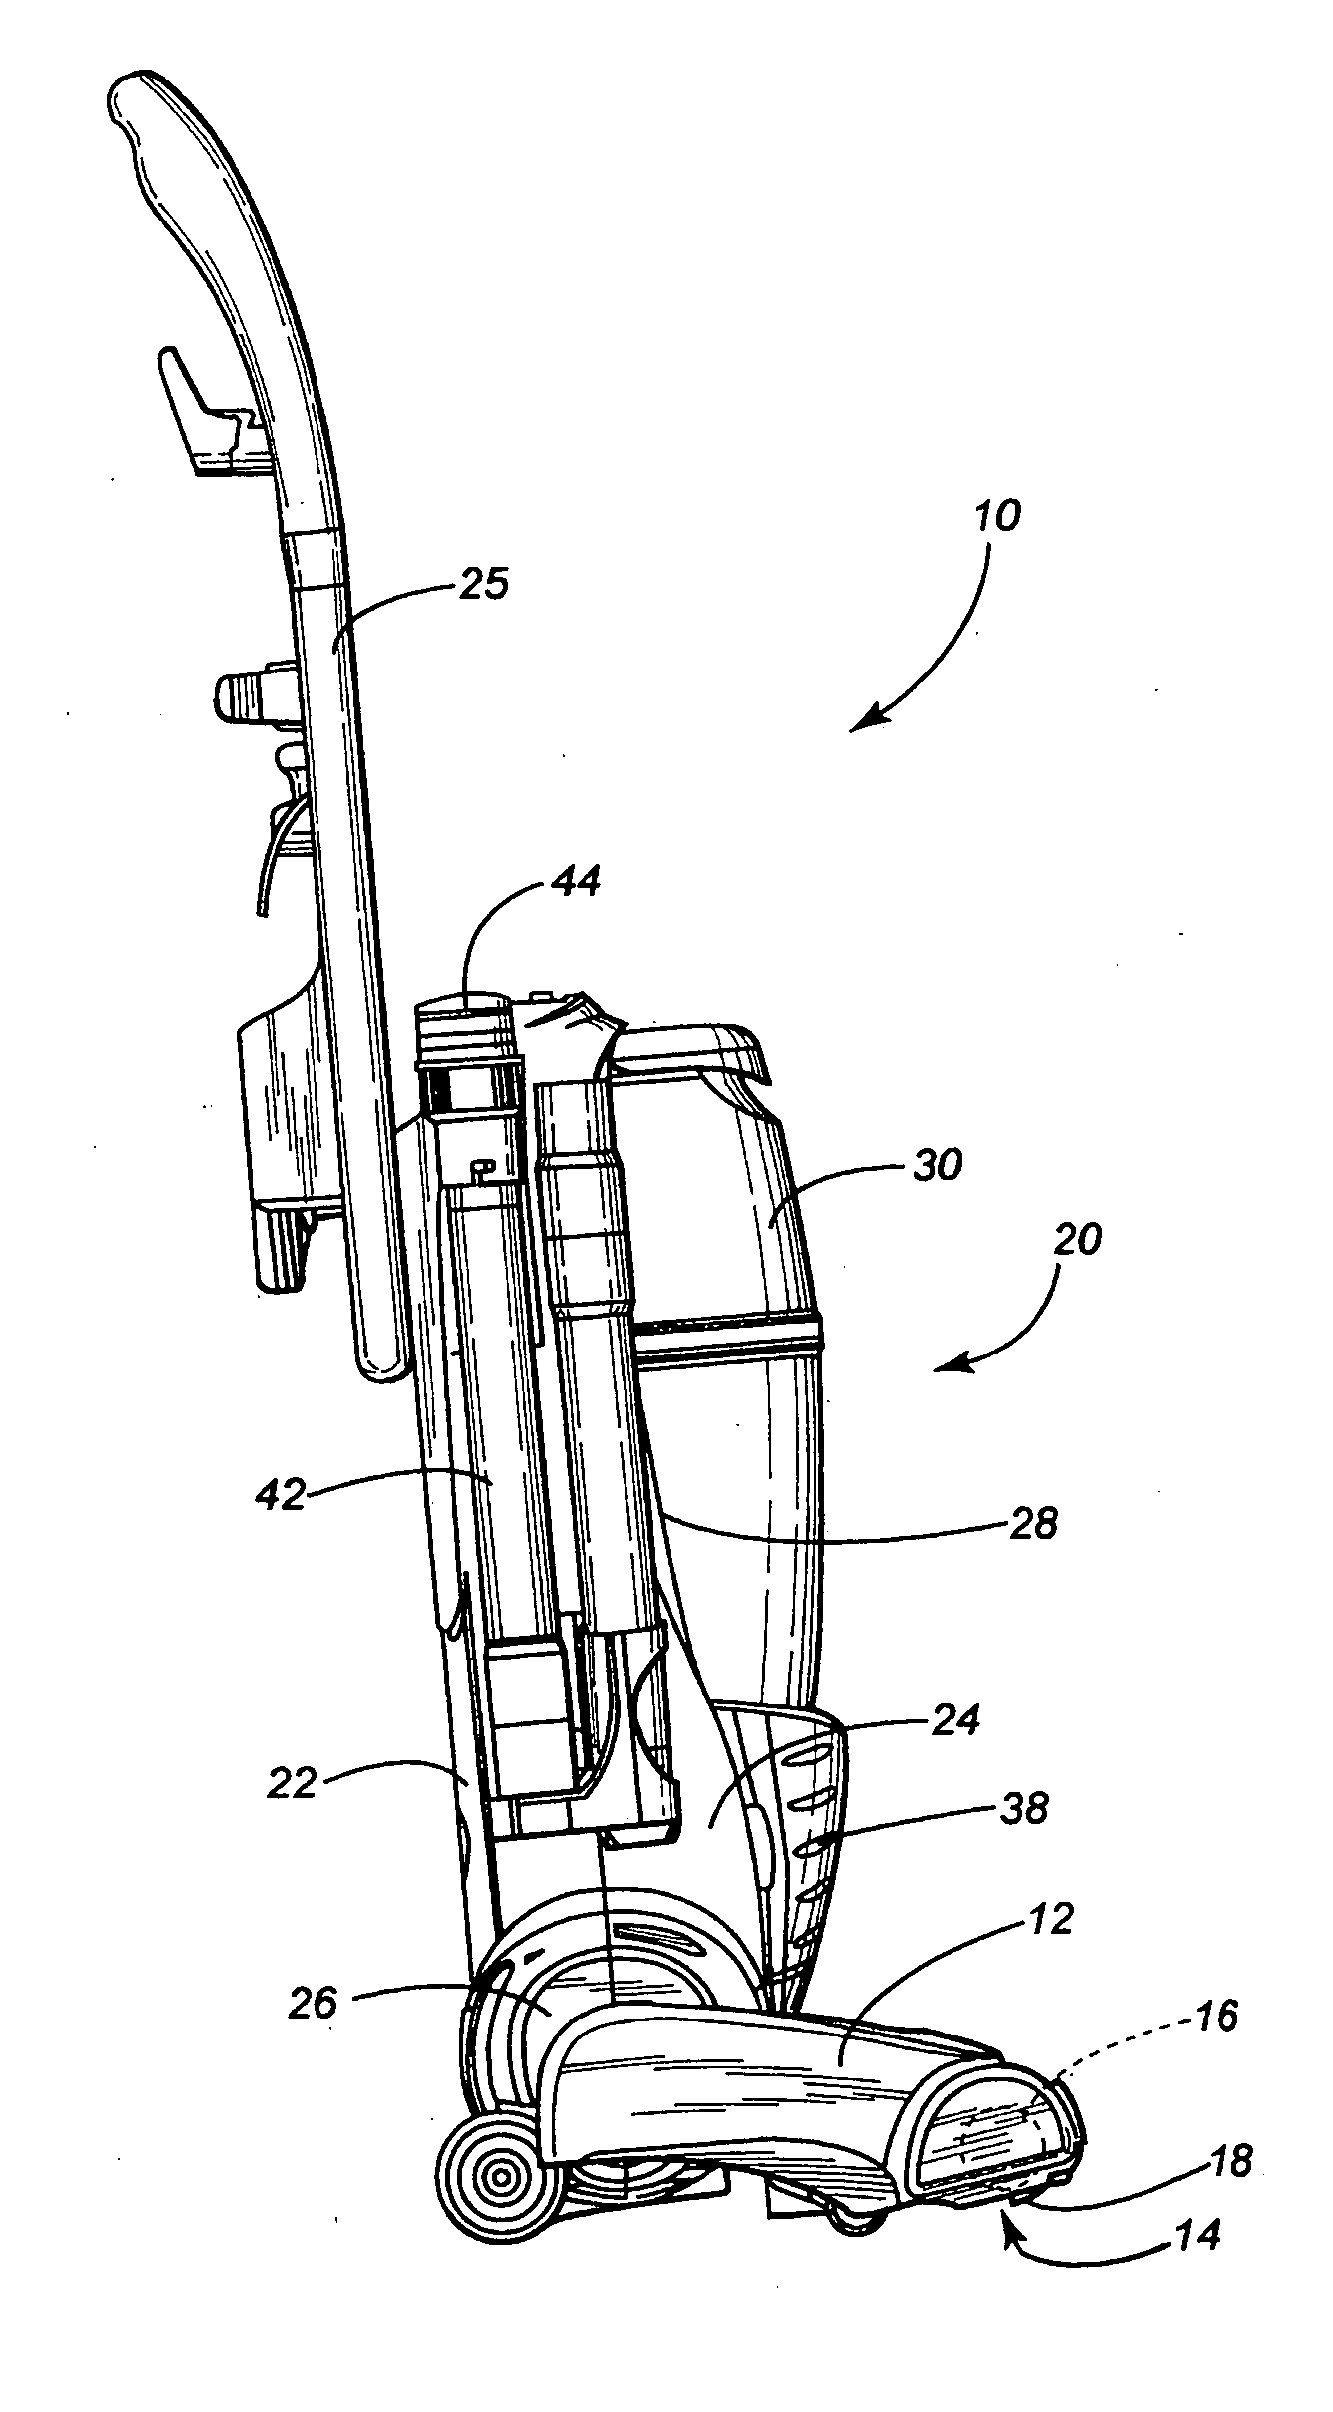 Upright vacuum cleaner equipped with electrified stretch hose and wand